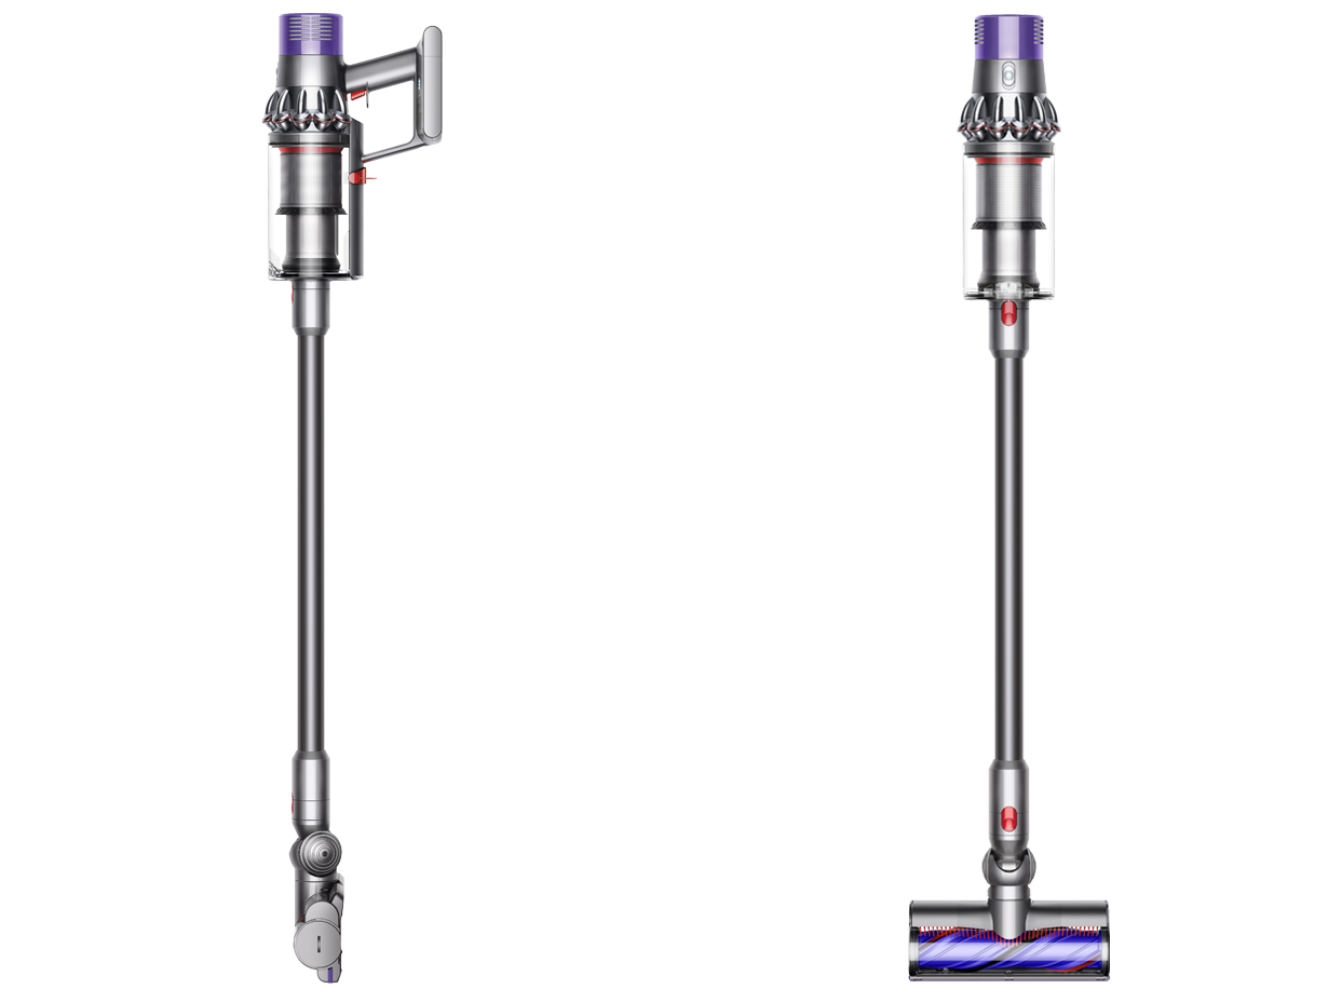 Dyson Cyclone V10 Animal Cordless Vacuum Cleaner | Dyson Cyclone